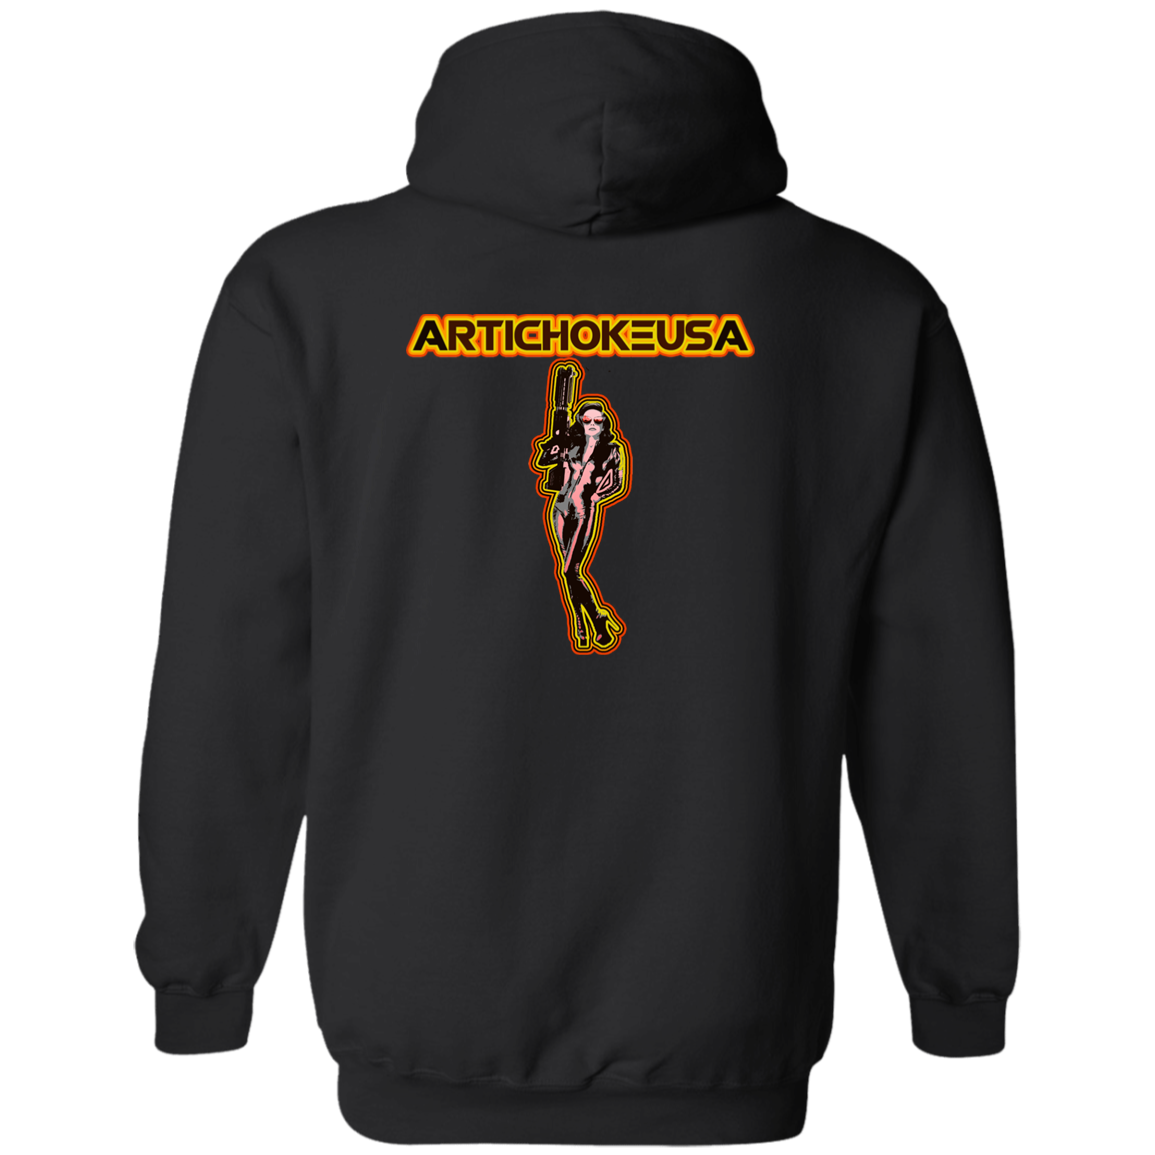 ArtichokeUSA Character and Font design. Let's Create Your Own Team Design Today. Mary Boom Boom. Zip Up Hooded Sweatshirt